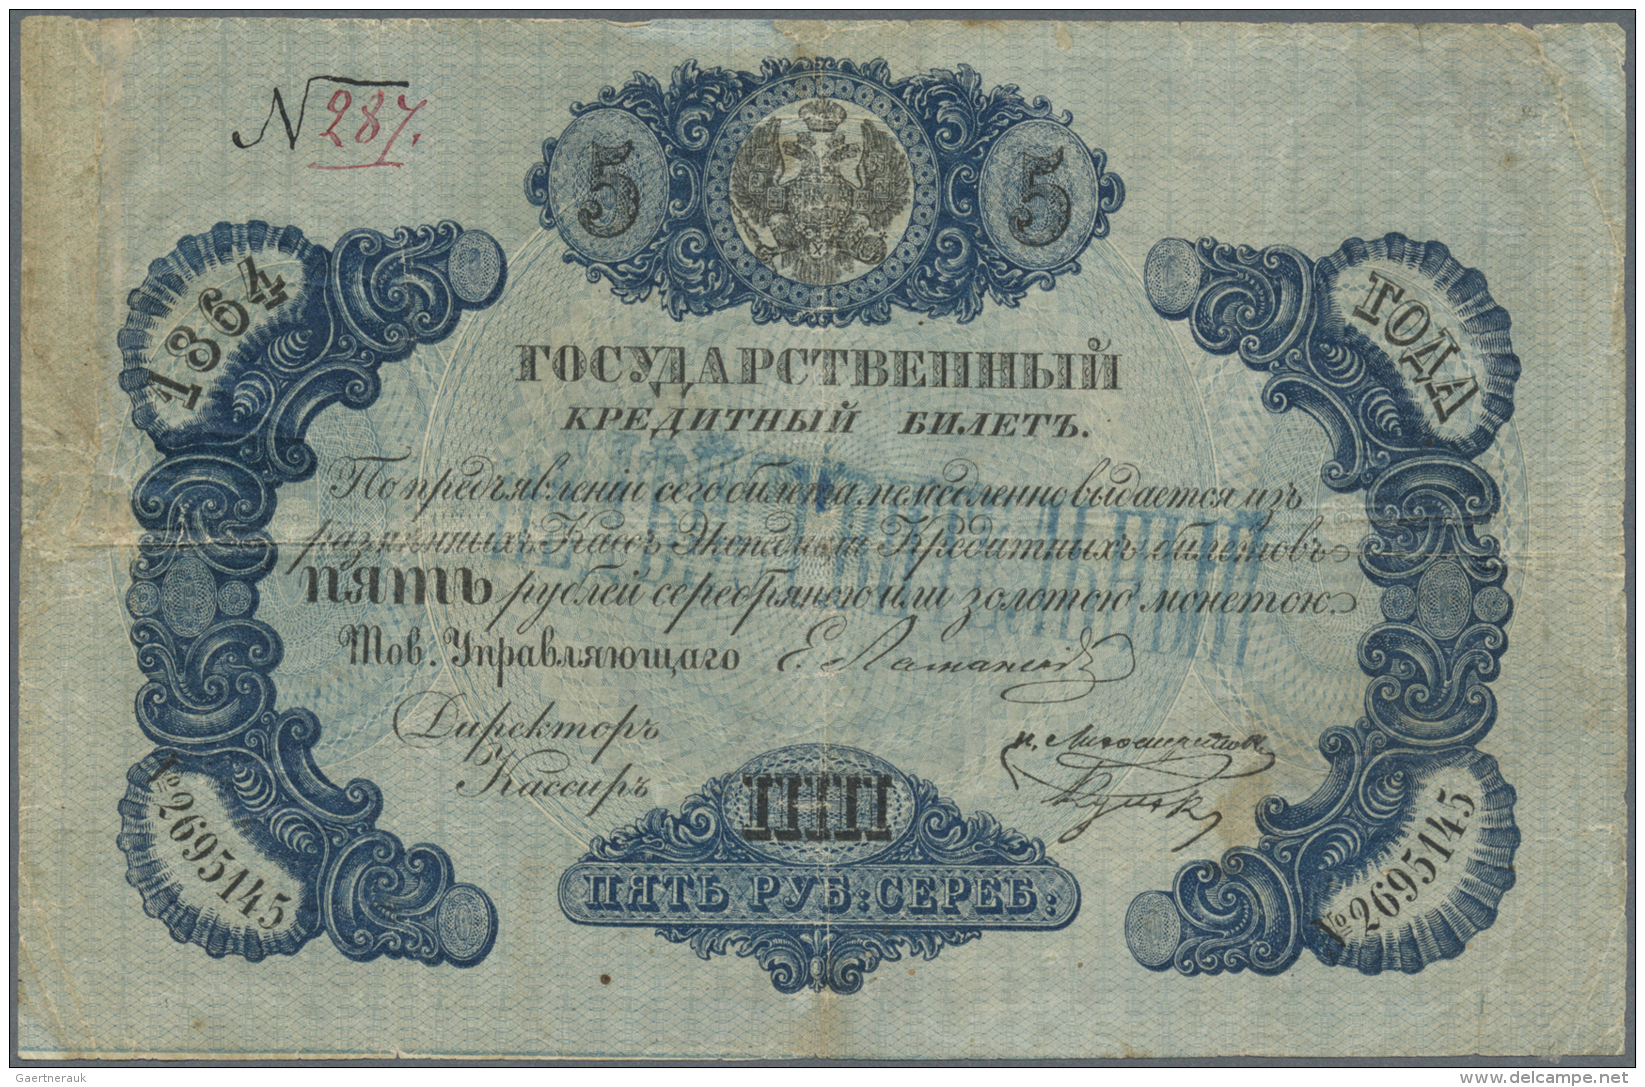 Russia / Russland: 5 Rubles 1864 P. A35, Used With Folds And Creases In Paper, Restored Larger Part At Upper Left Corner - Russie